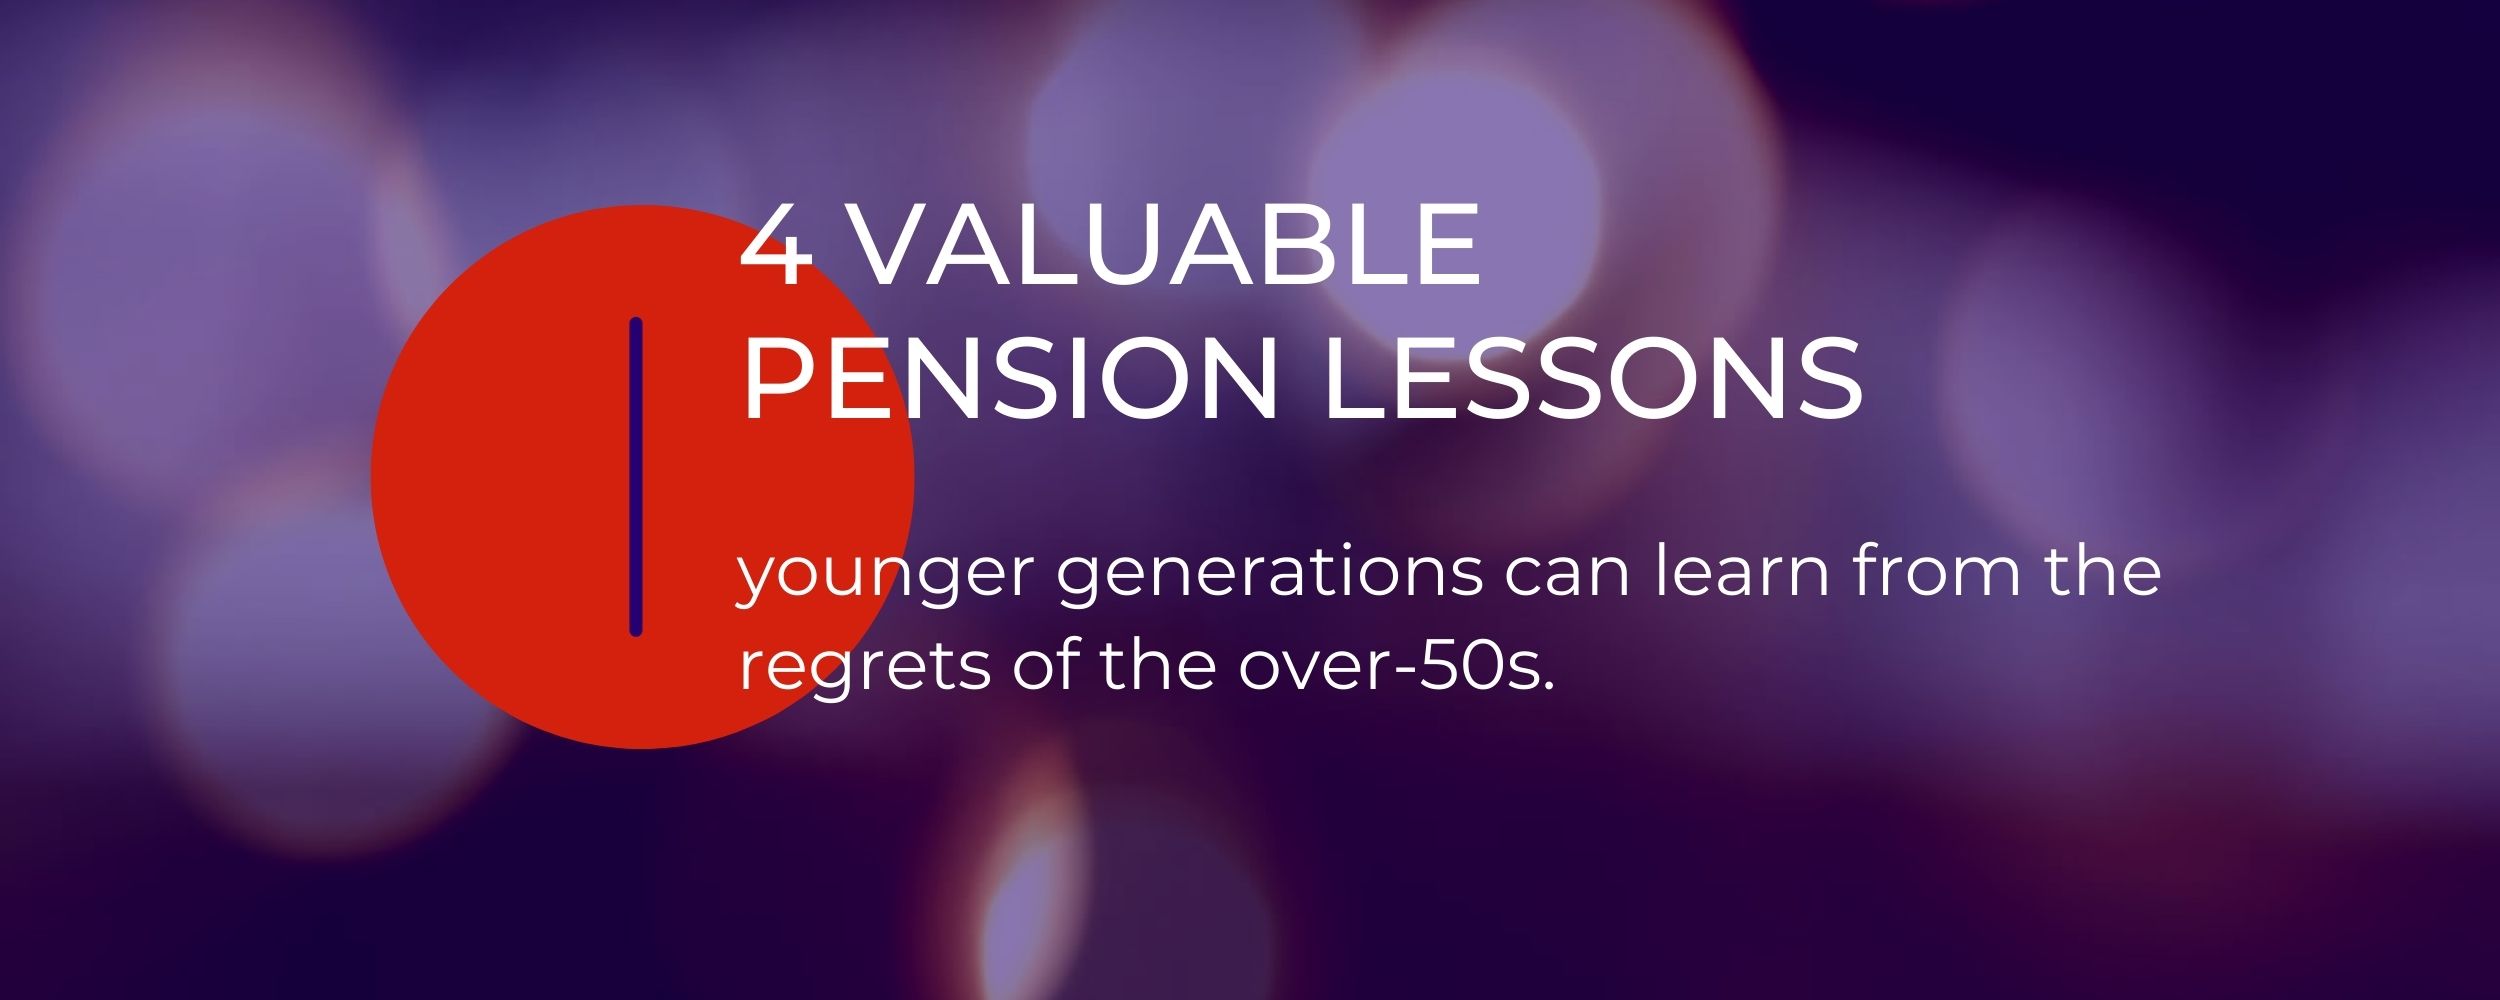 4 pensions lessons